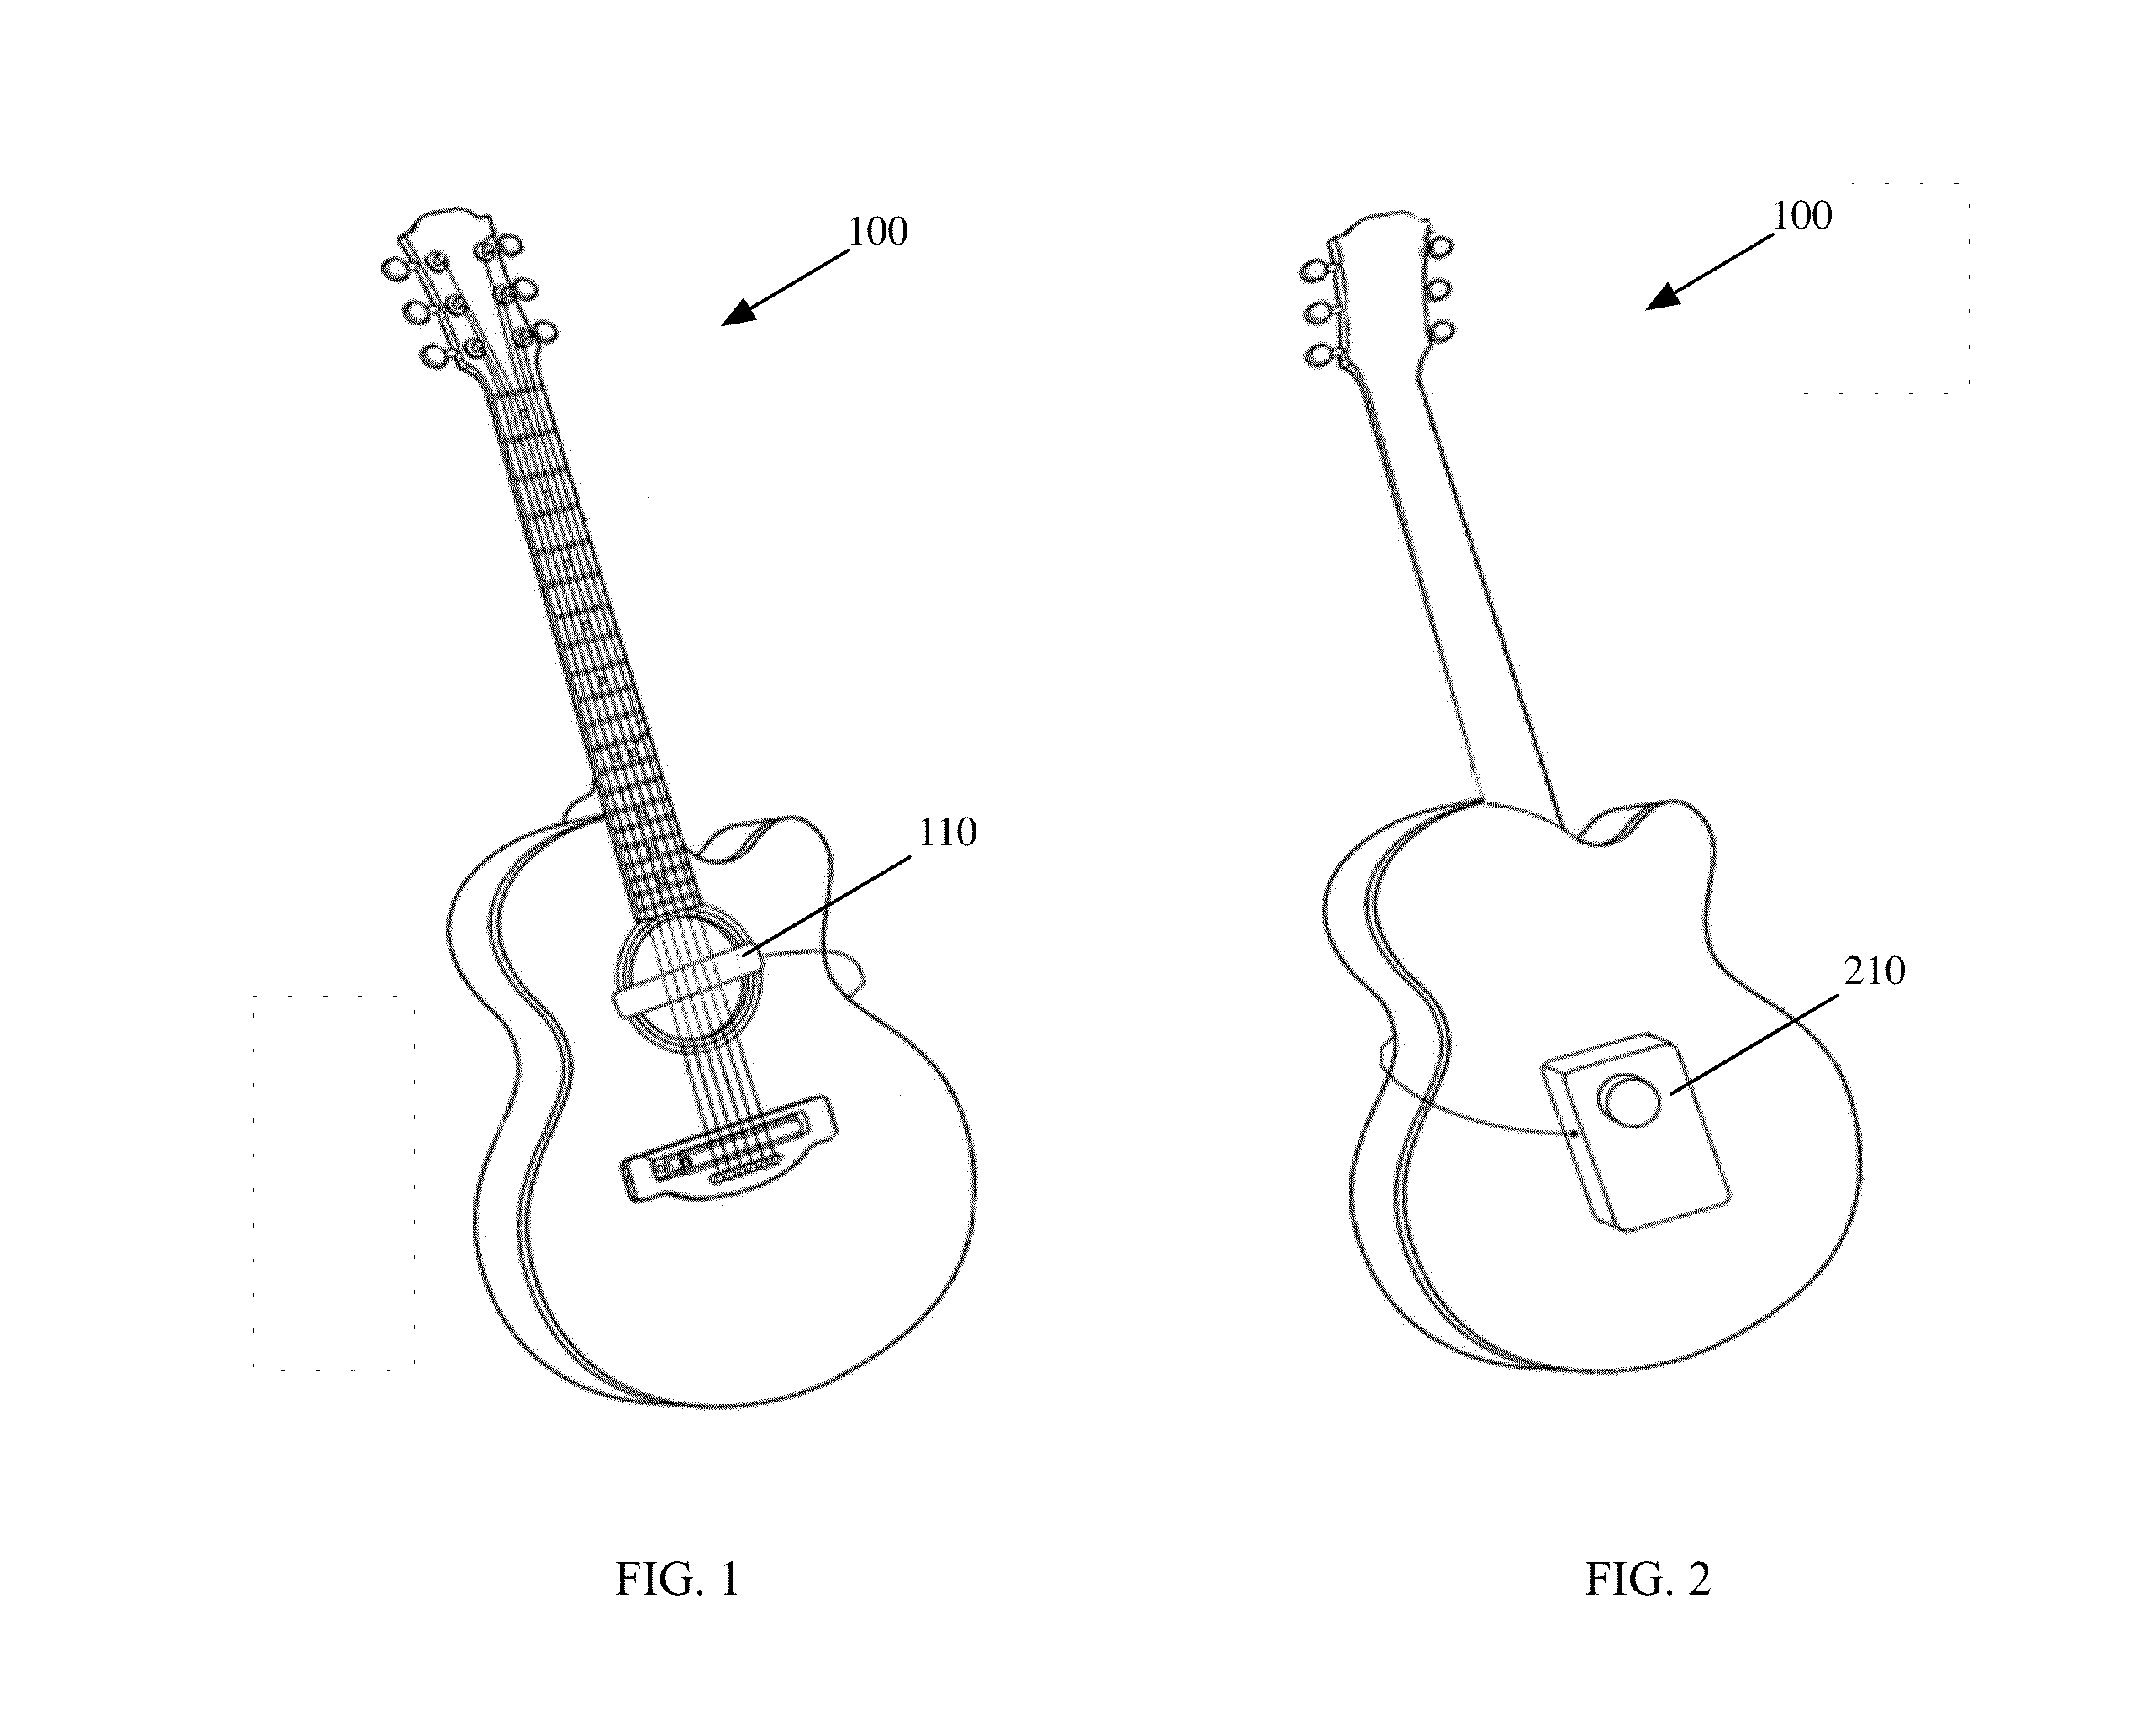 System and method for sound augmentation of acoustic musical instruments